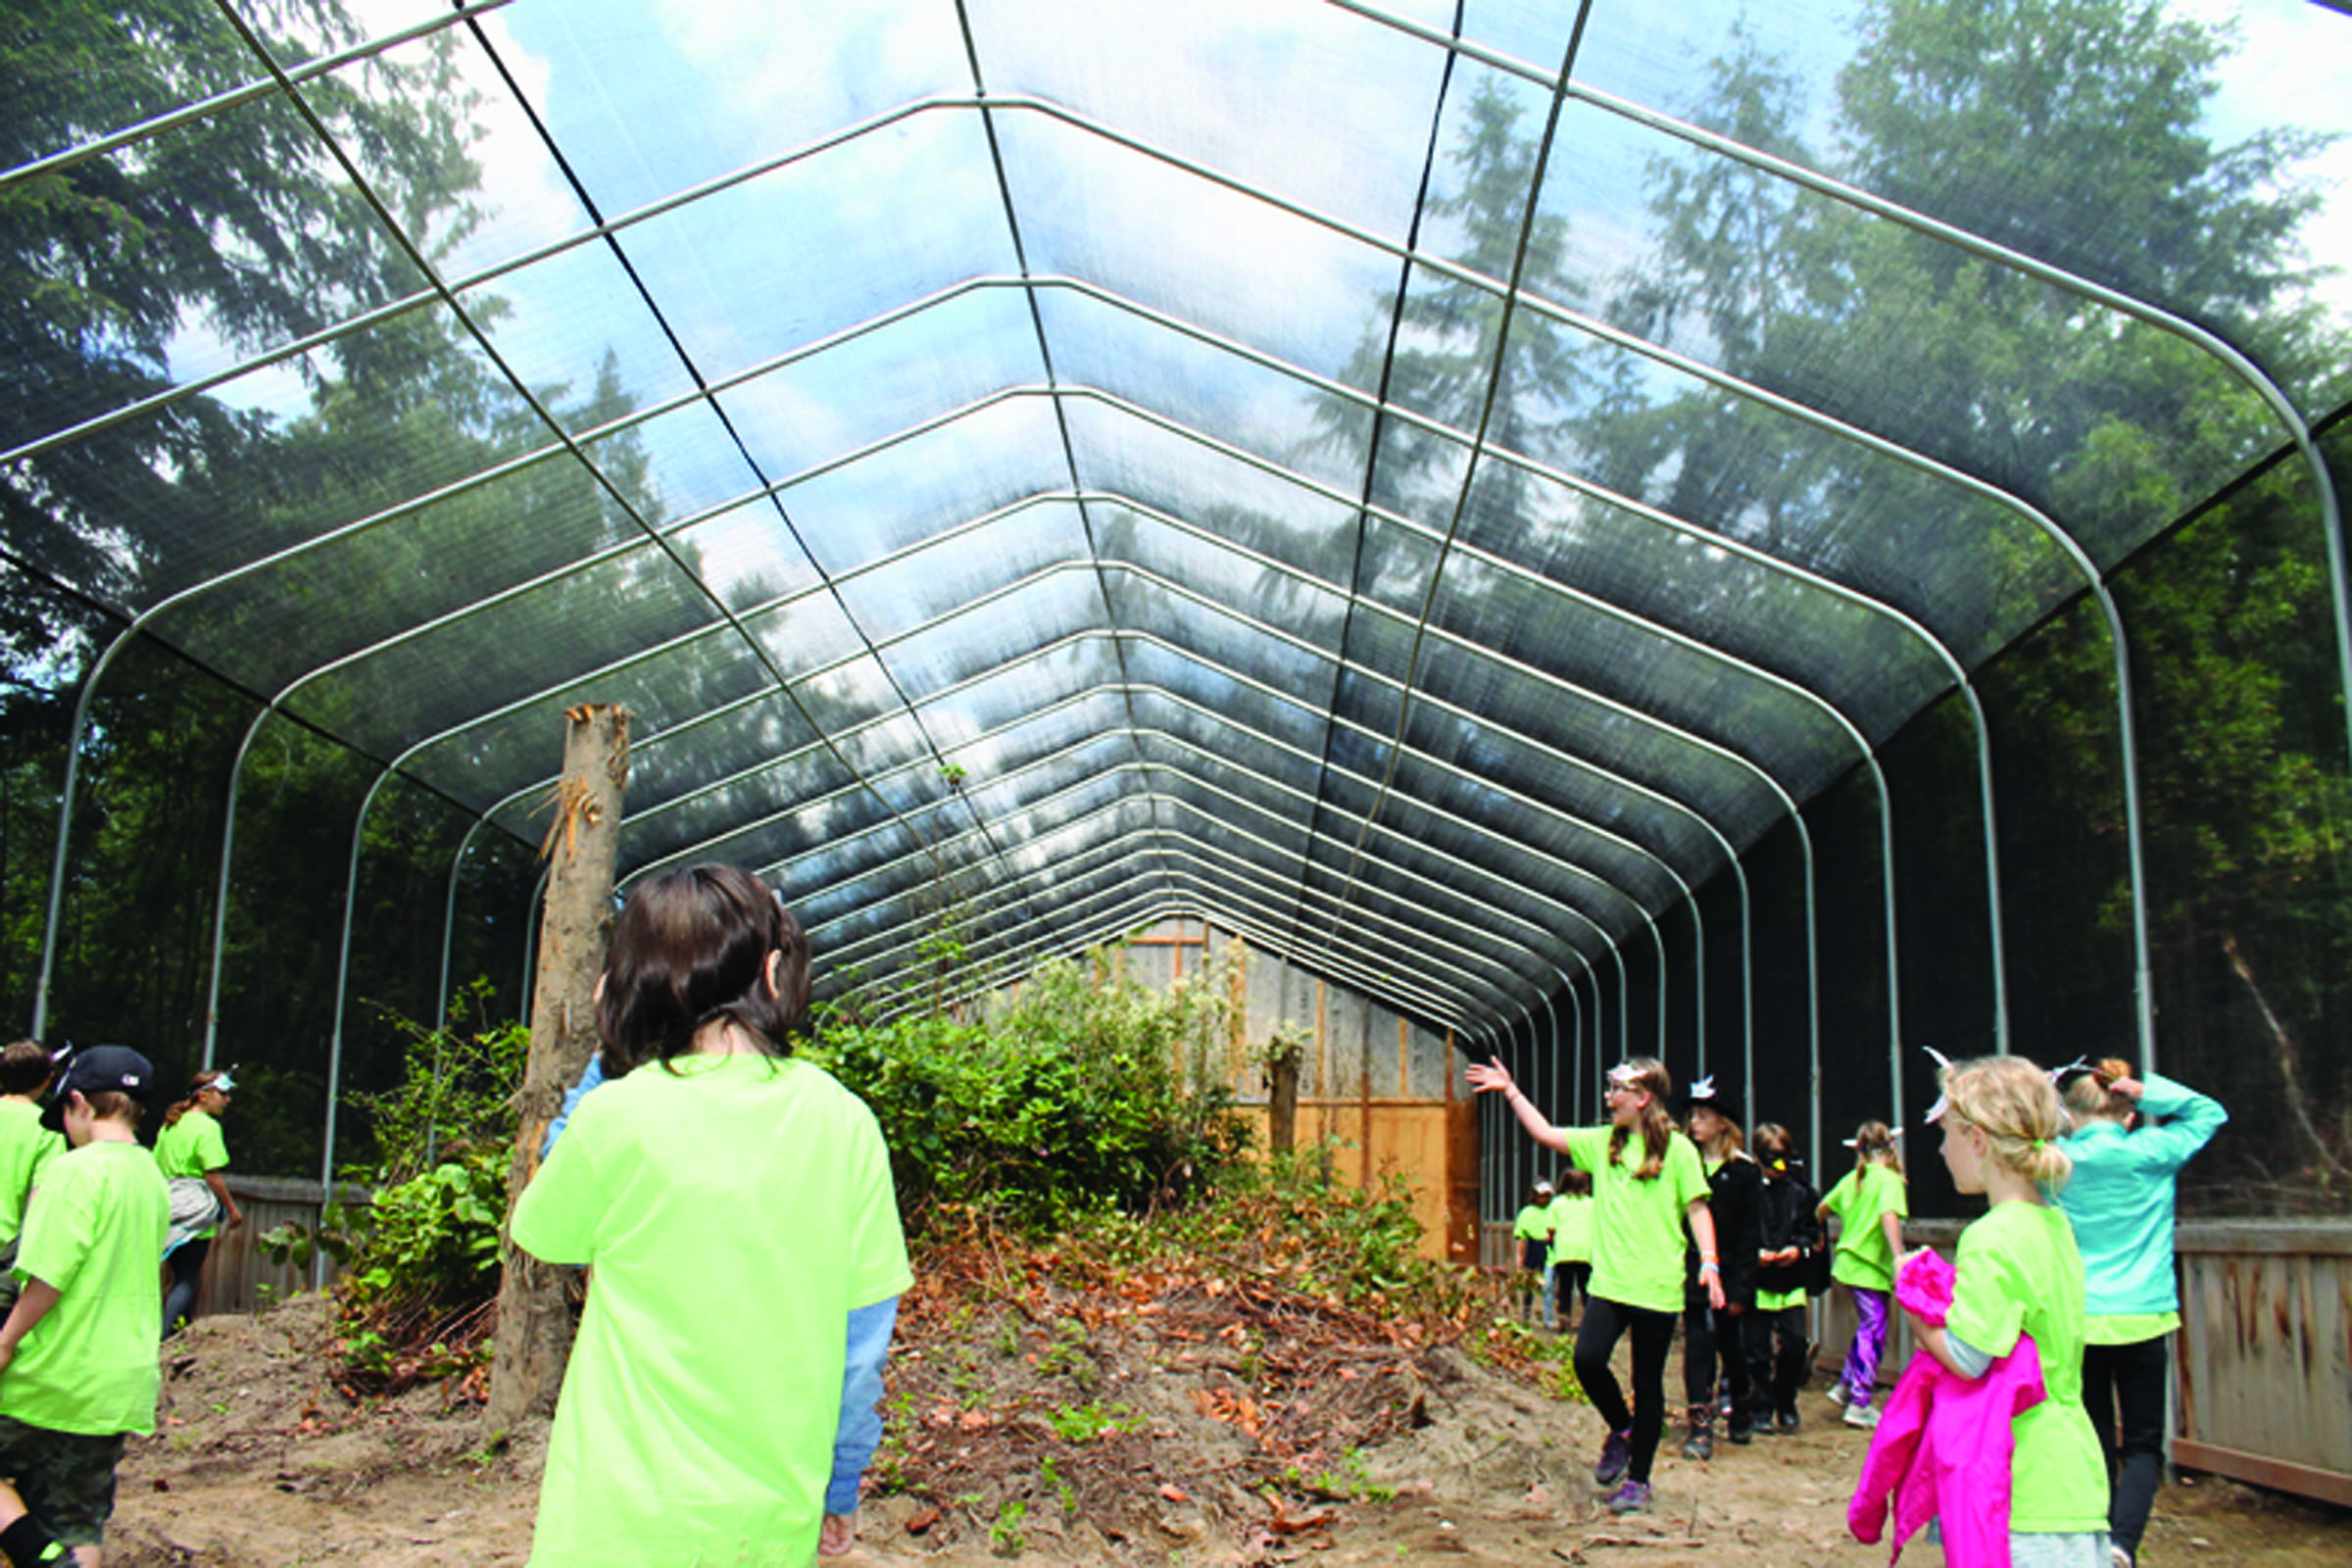 More than 40 students from Grant Street Elementary who helped raise funds for the relocation of the 100-foot flight pen visited the Discovery Bay Wild Bird Rescue on June 10. (Alana Linderoth/Olympic Peninsula News Group)